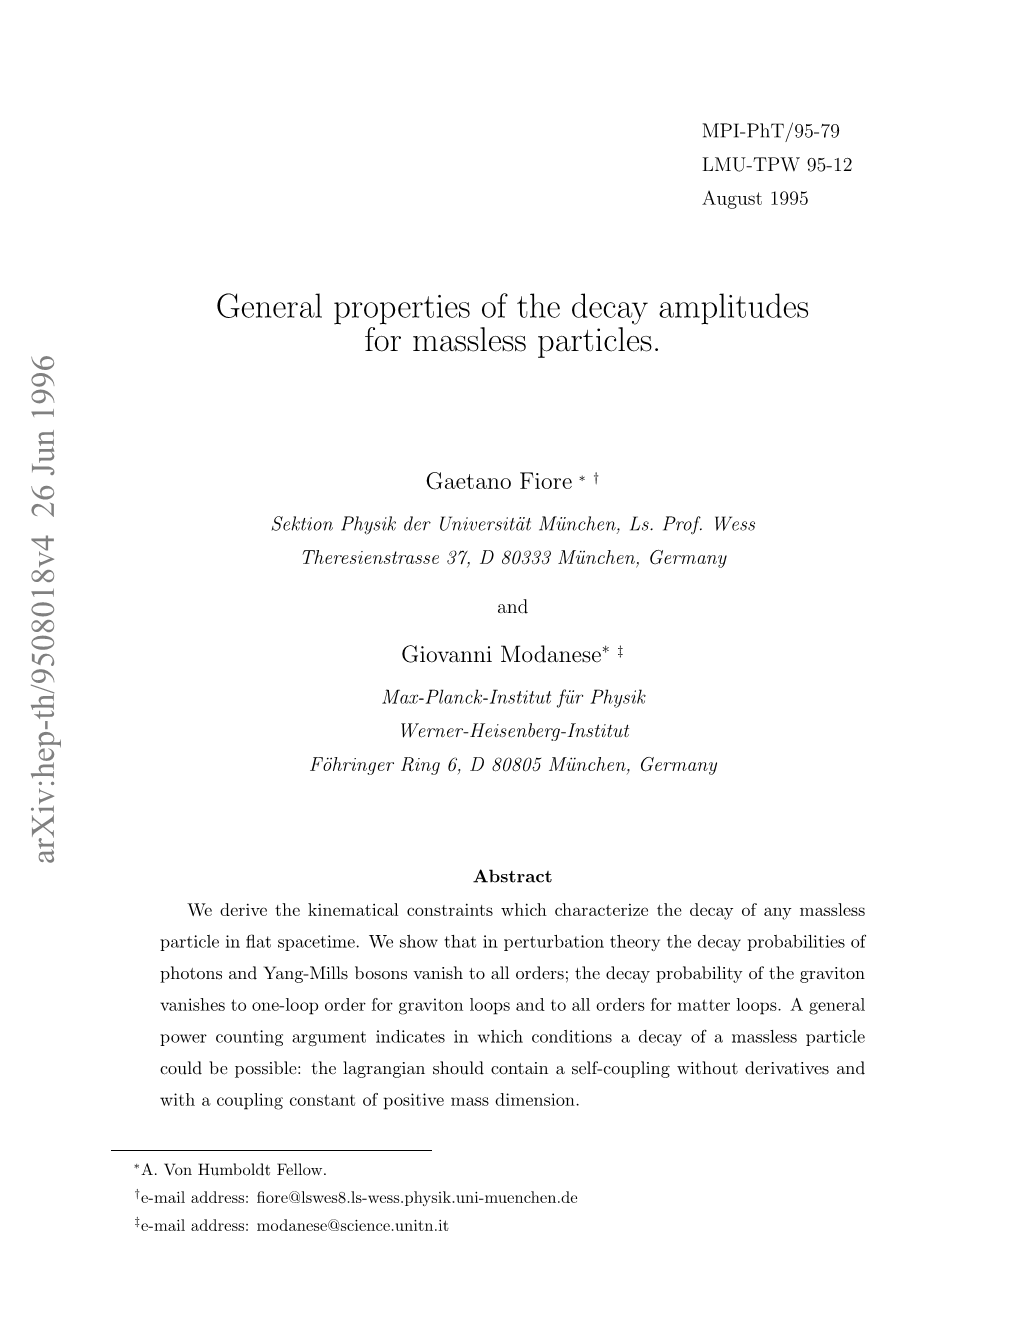 General Properties of the Decay Amplitudes for Massless Particles